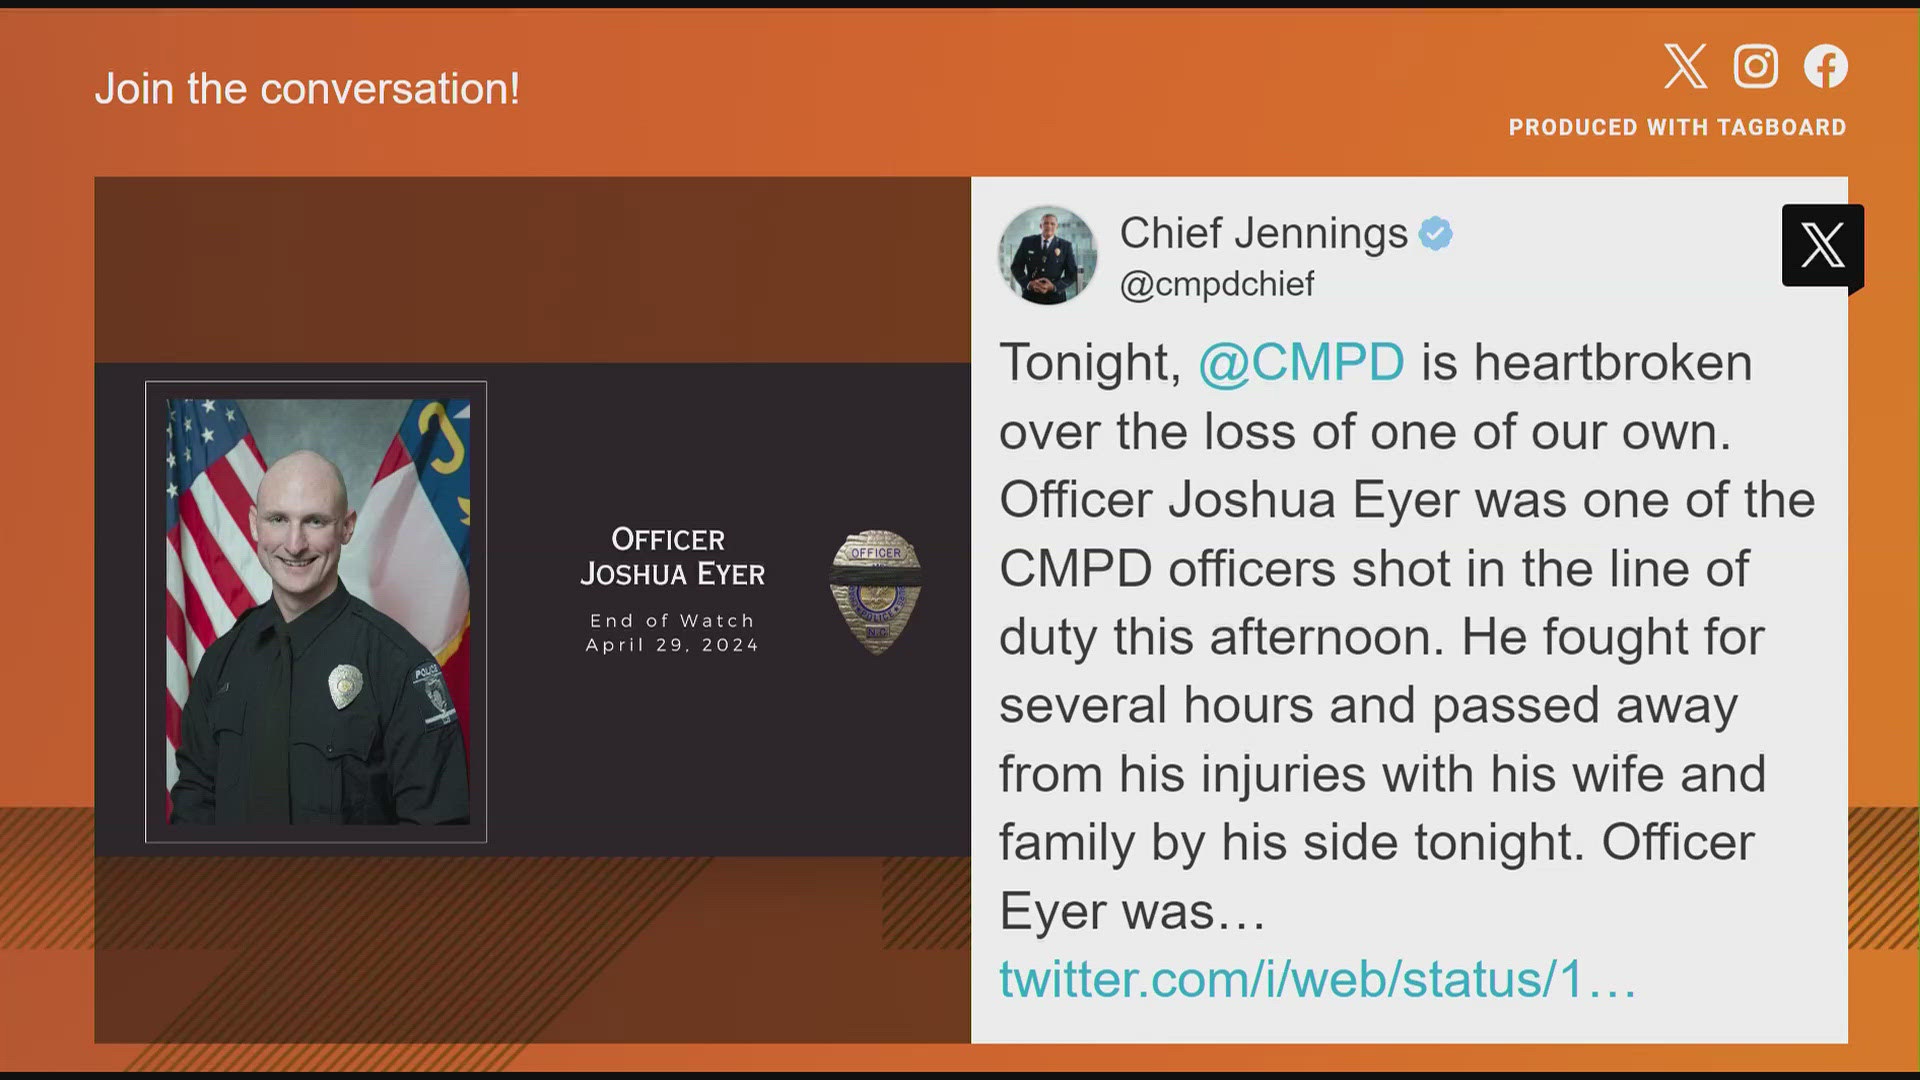 CMPD Officer Joshua Eyer was shot in the line of duty in East Charlotte and later died from his injuries.